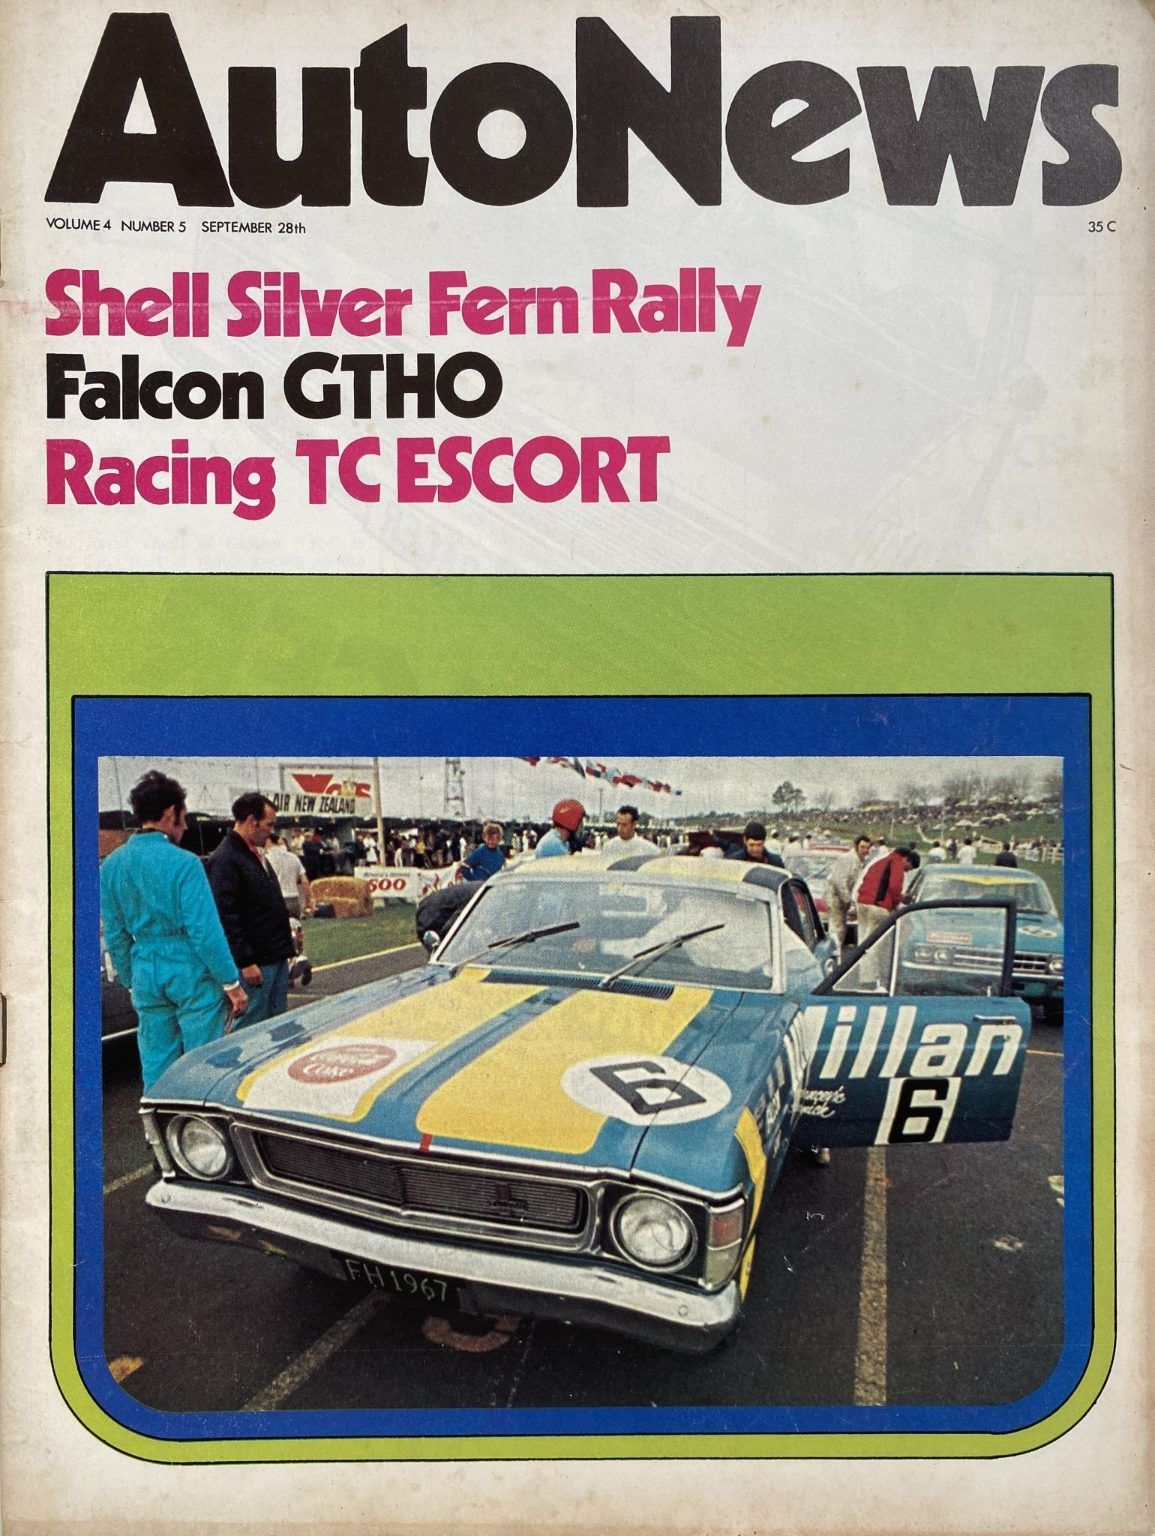 OLD MAGAZINE: Auto News - Vol. 4, Number 5, 28th September 1970